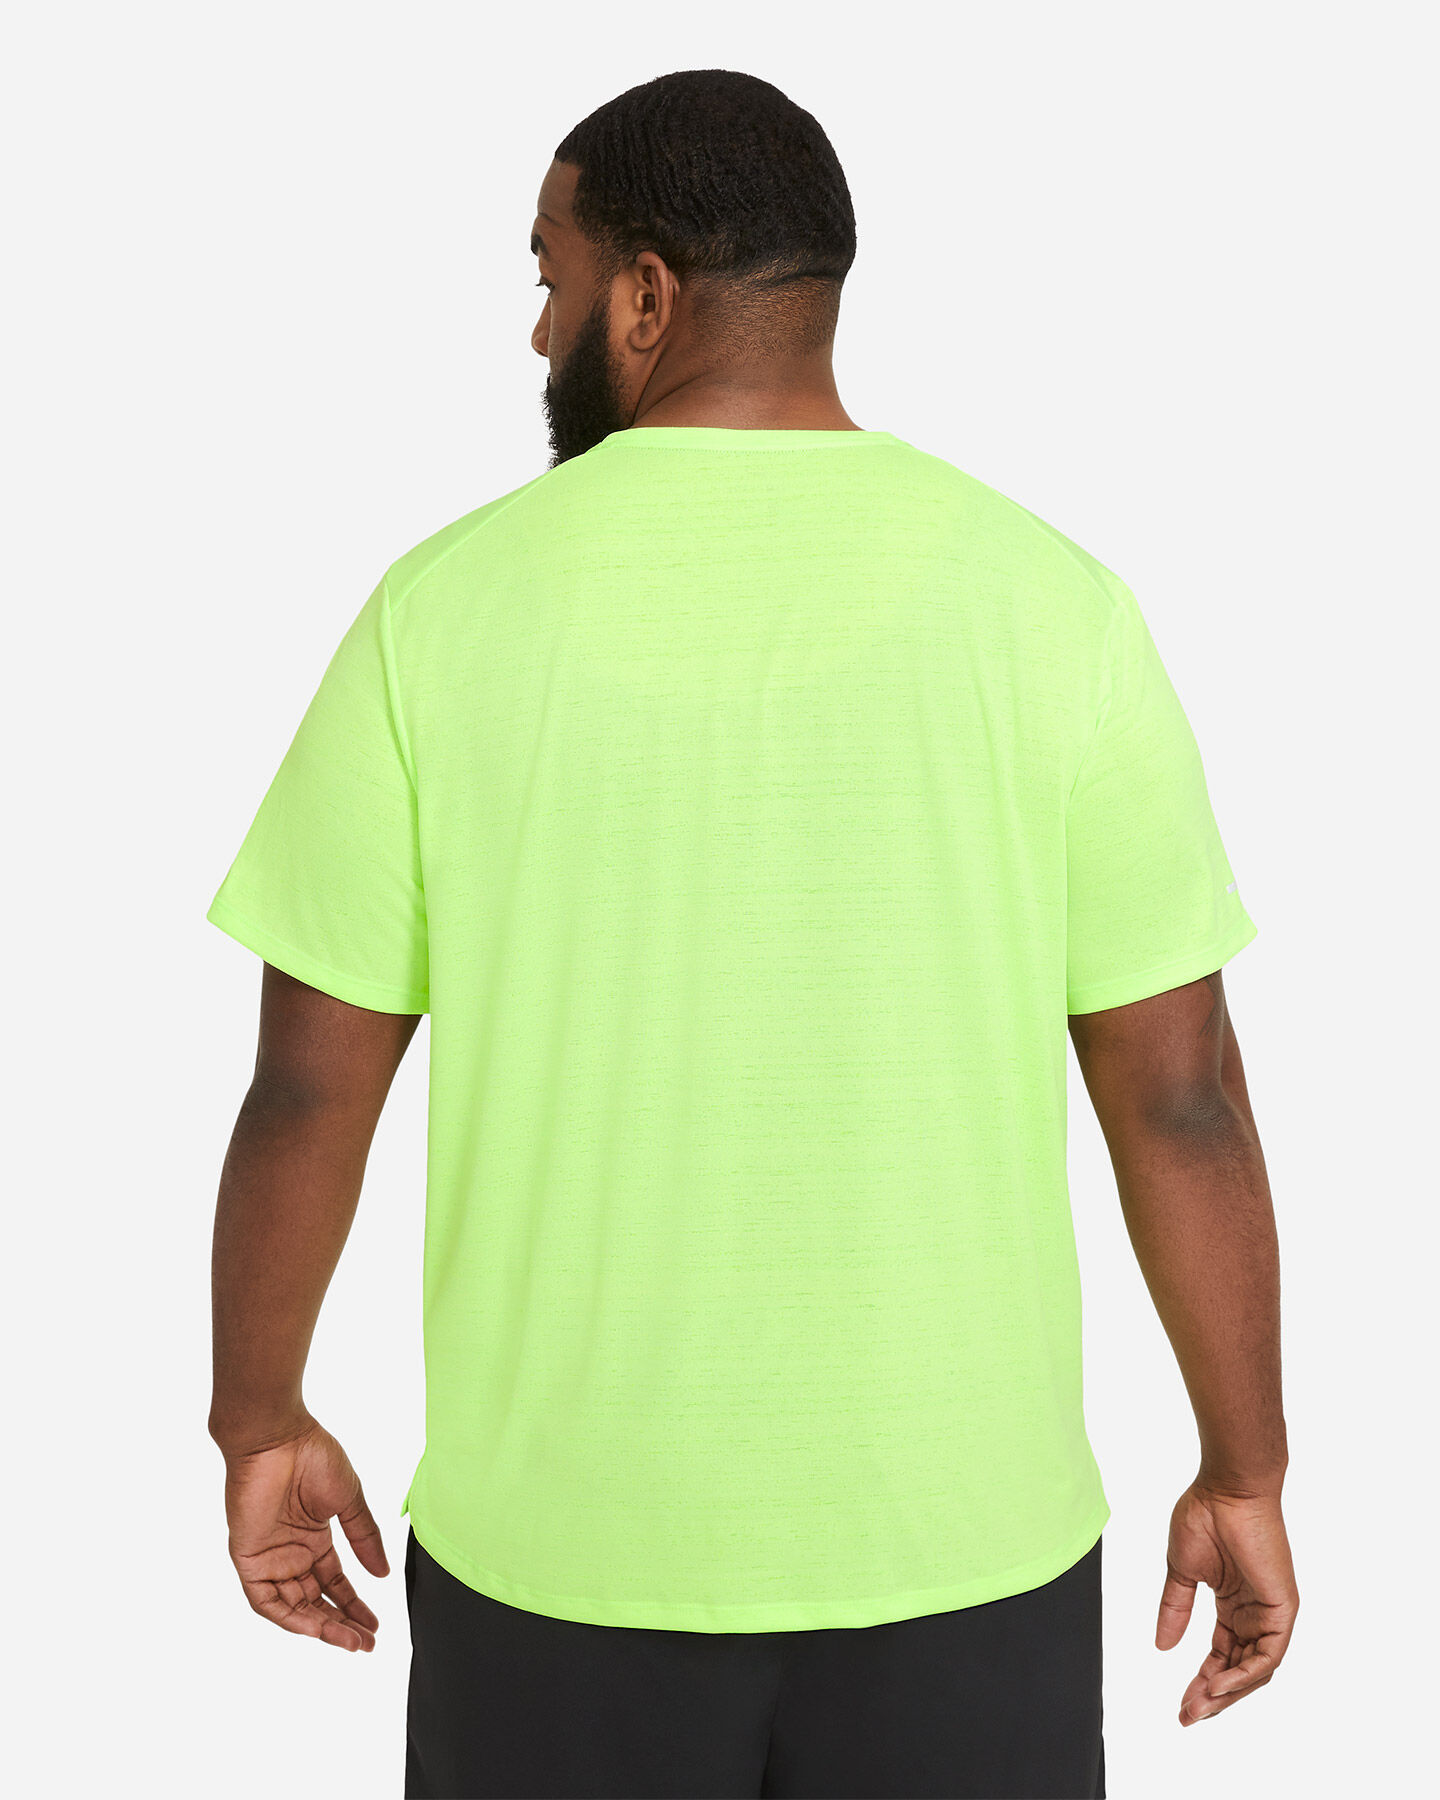  T-Shirt running NIKE DRI FIT MILER M S5268726|358|S scatto 1